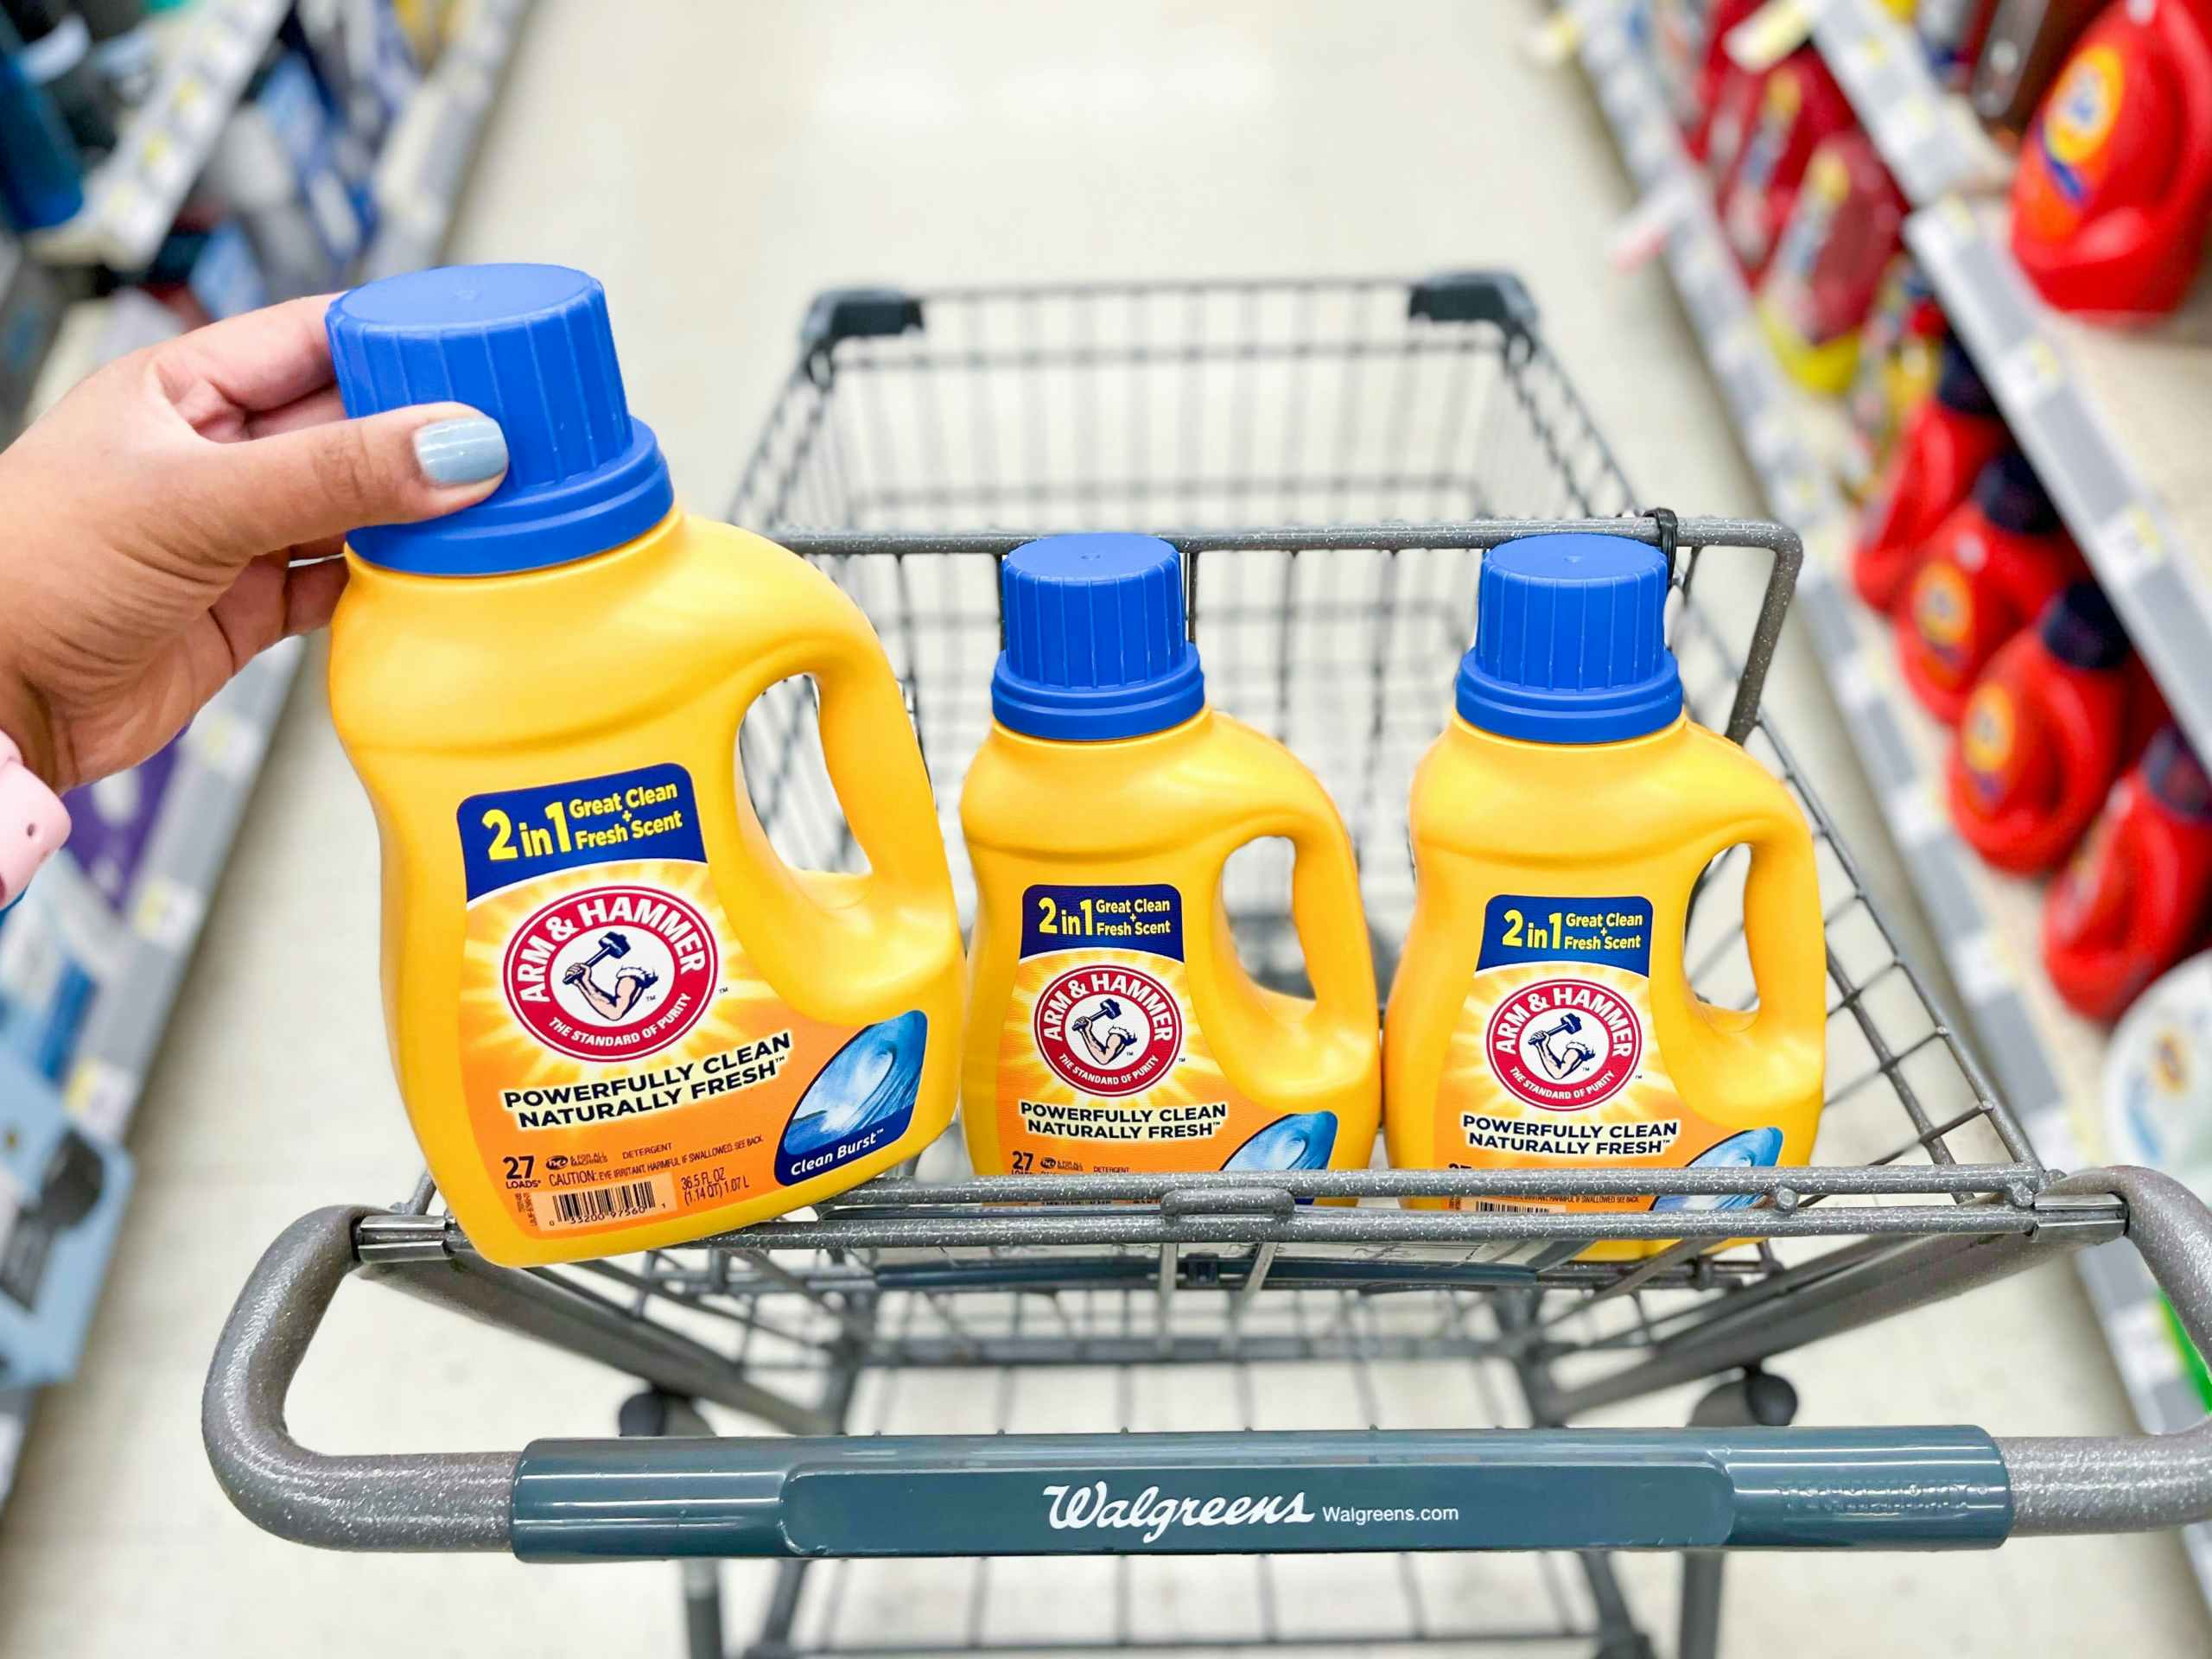 hand on bottle of Arm & Hammer Liquid detergent sitting on cart next to two other bottles